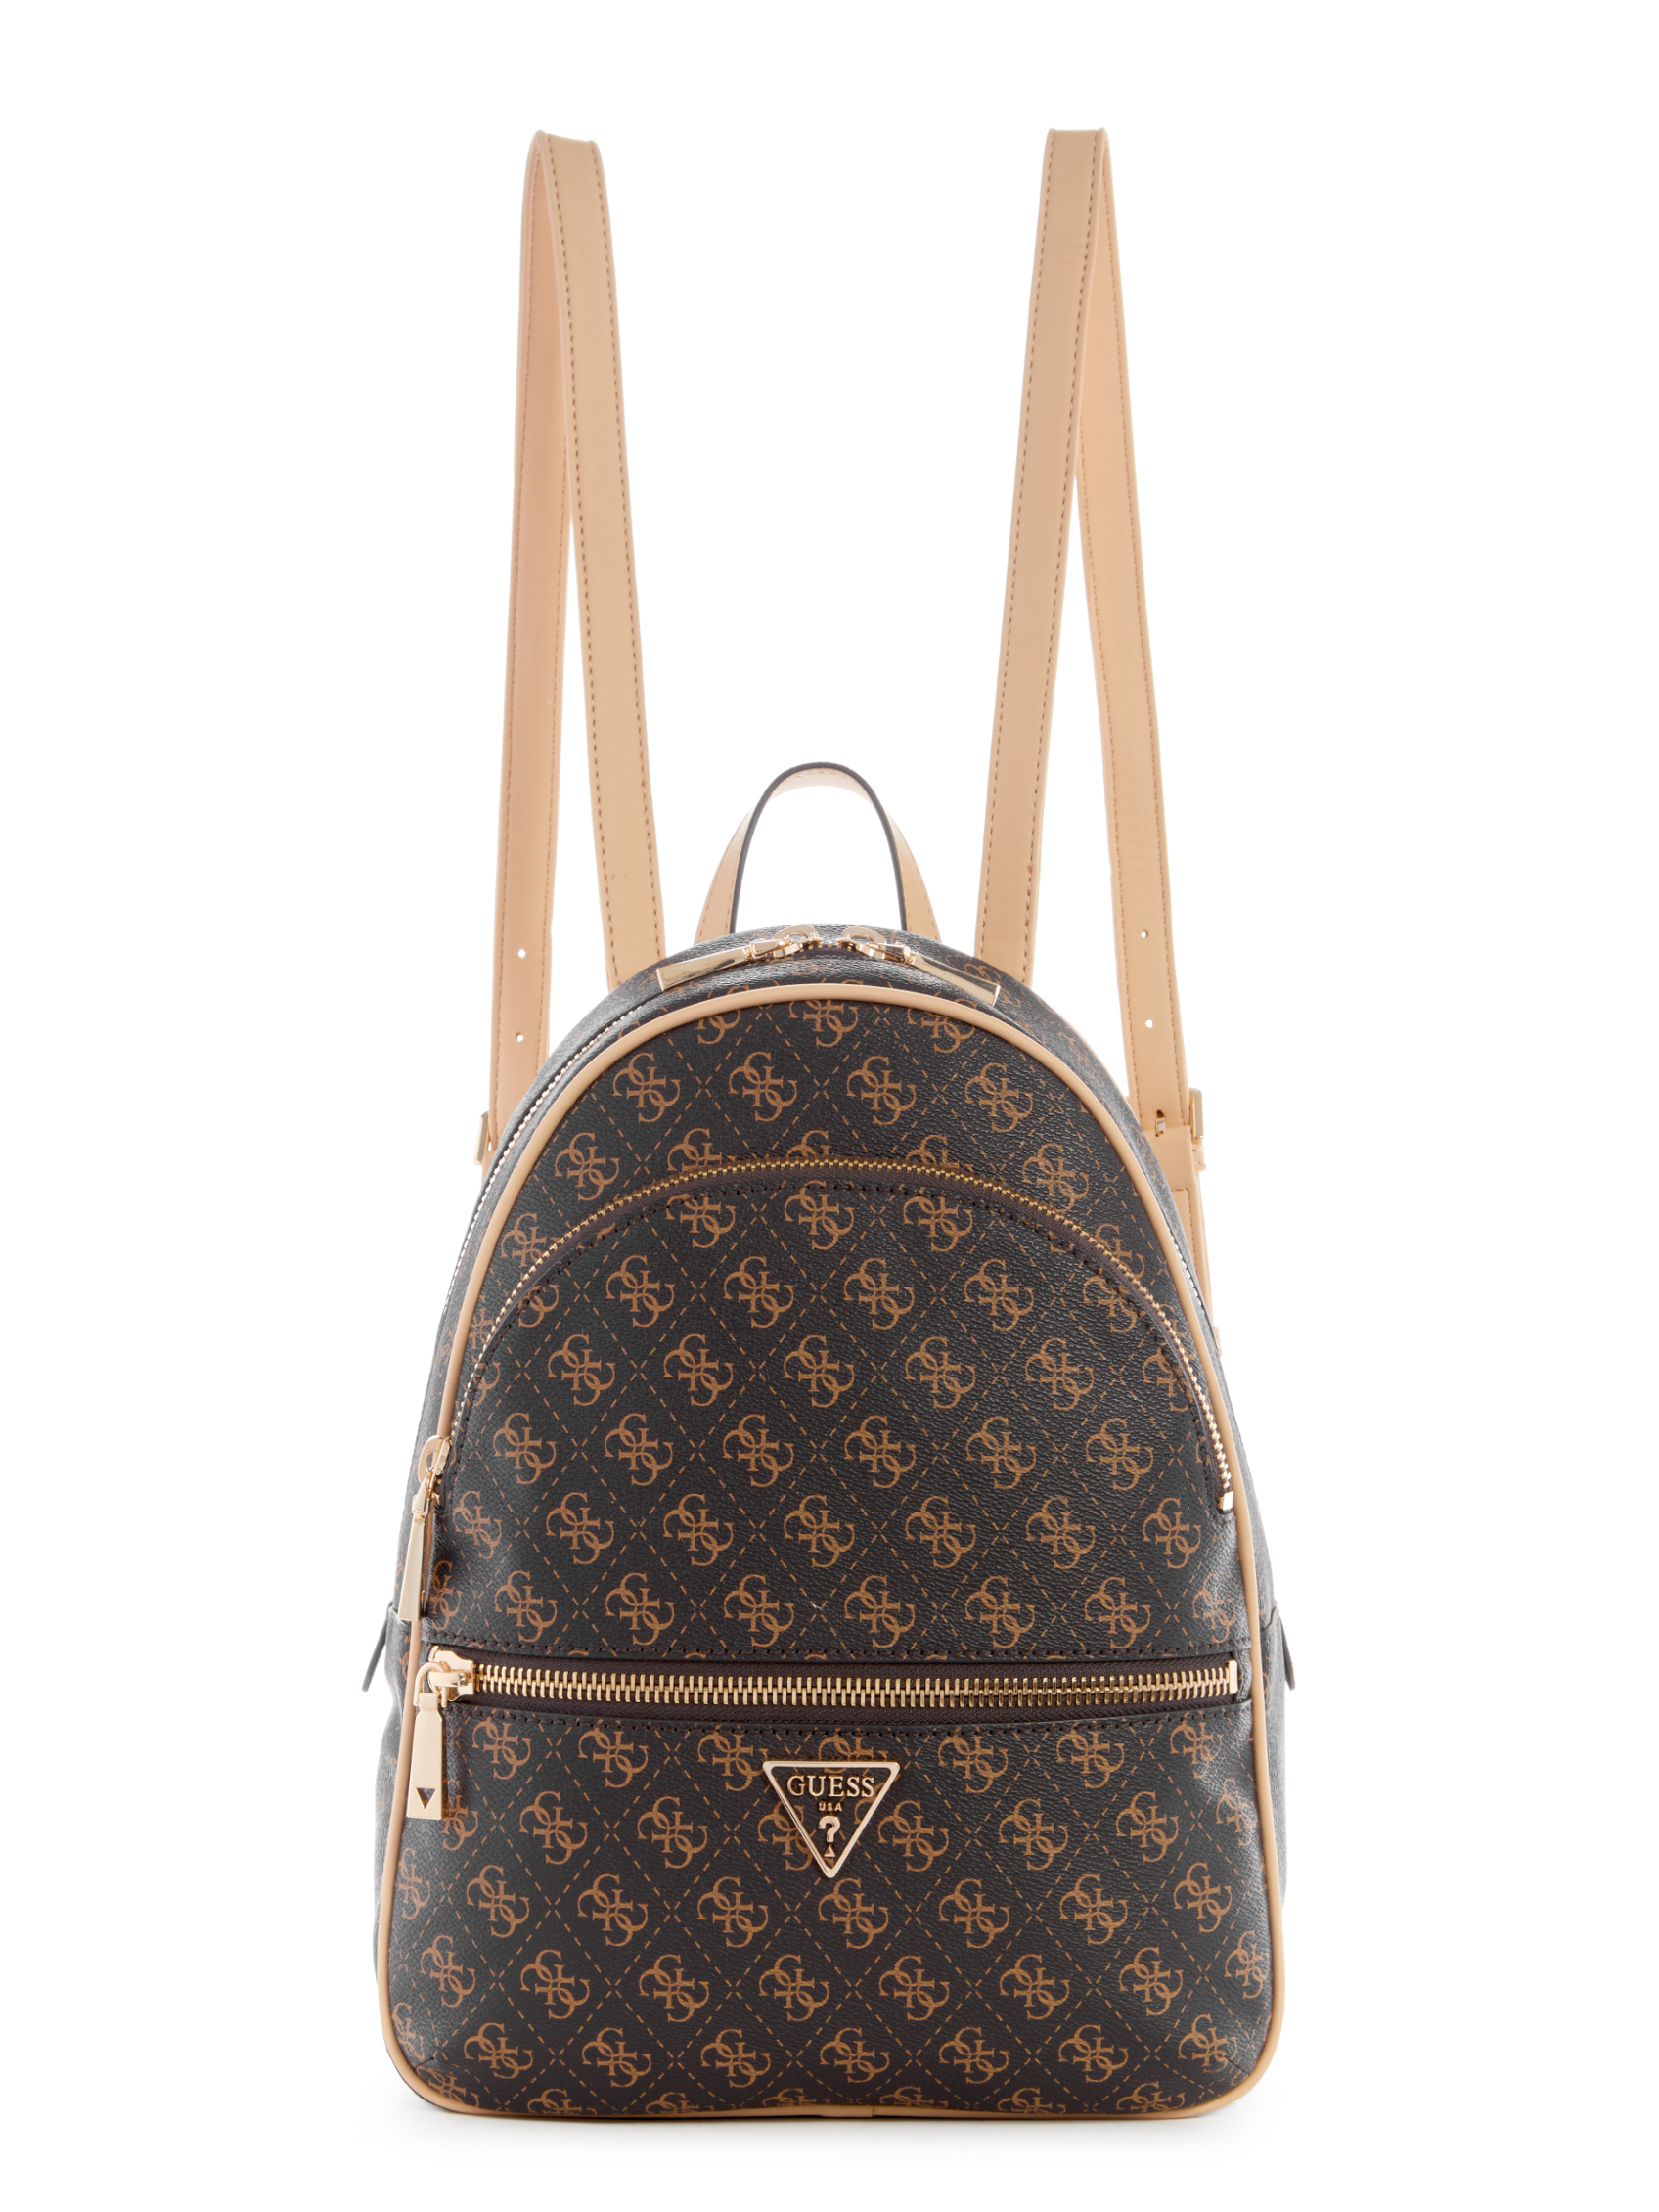 MANHATTAN LARGE BACKPACK | Guess Philippines